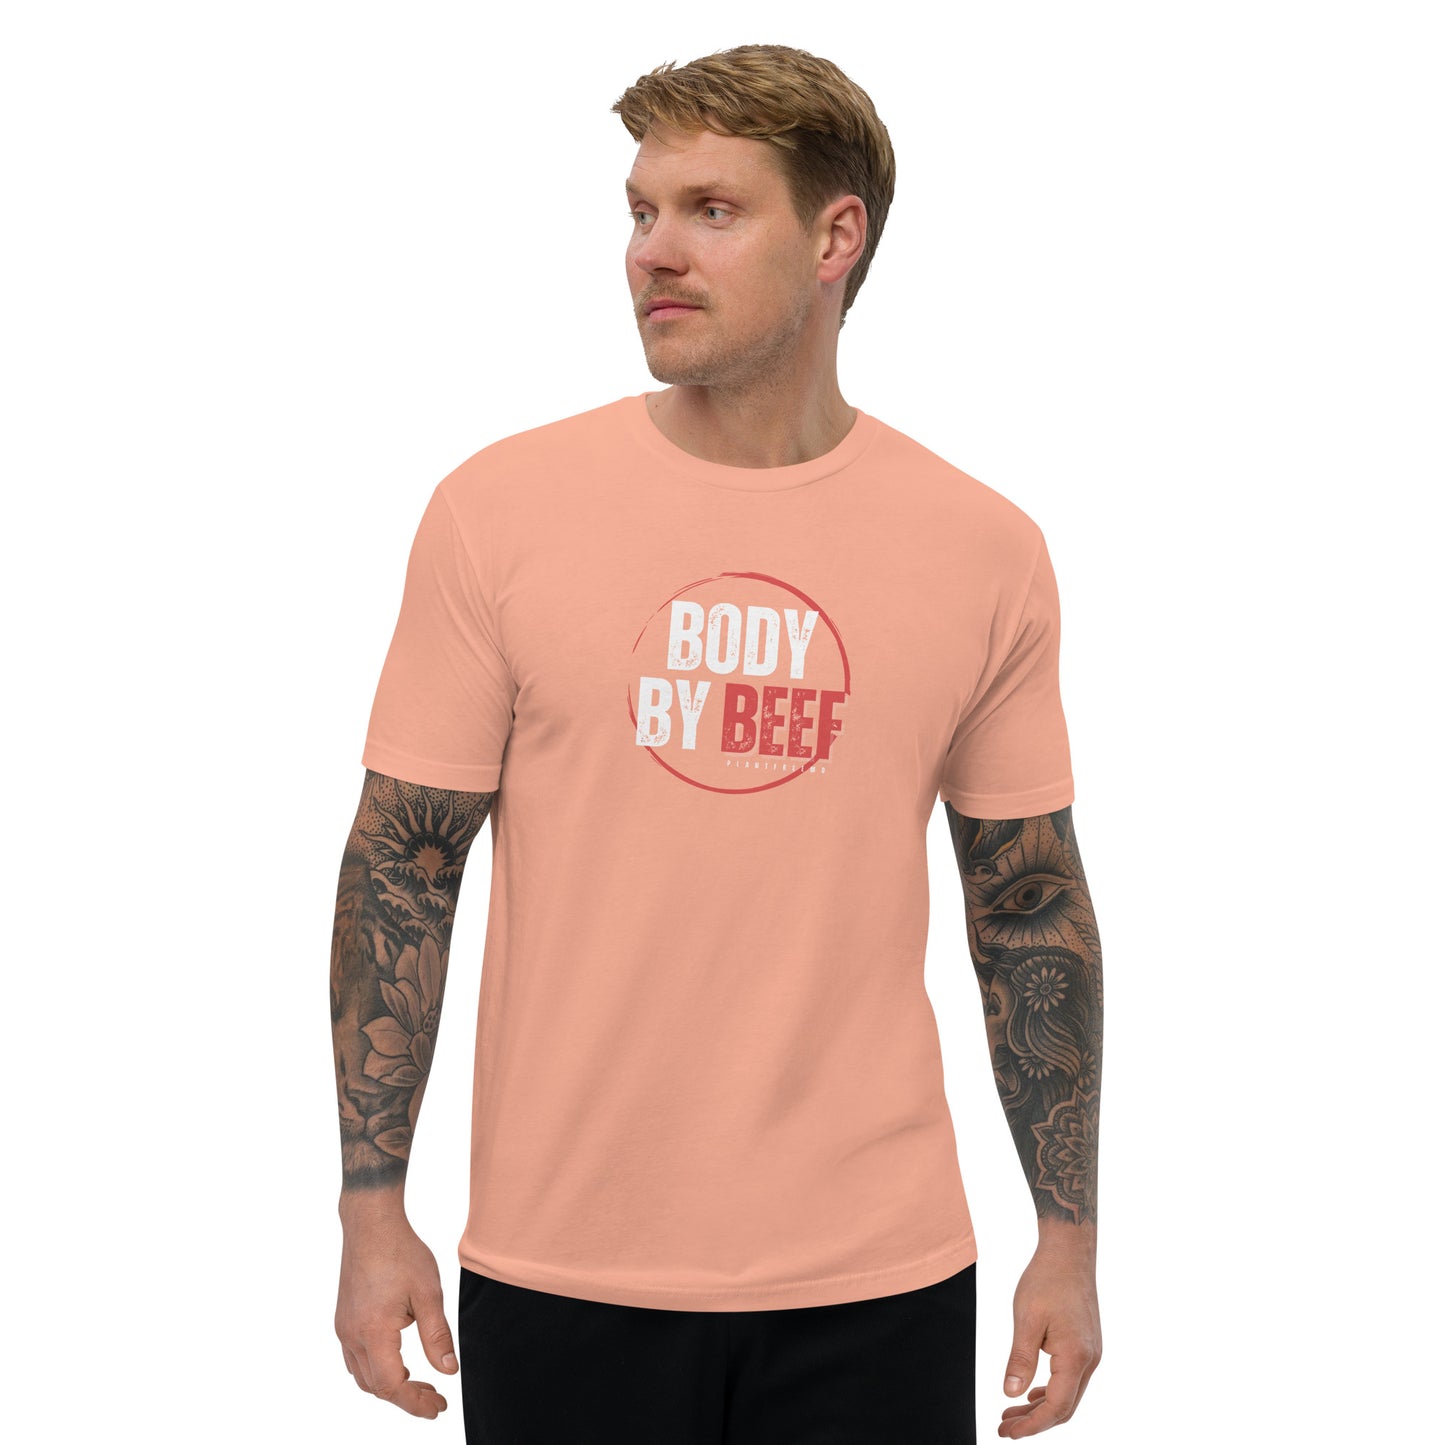 Body By Beef Men's Fitted T-shirt